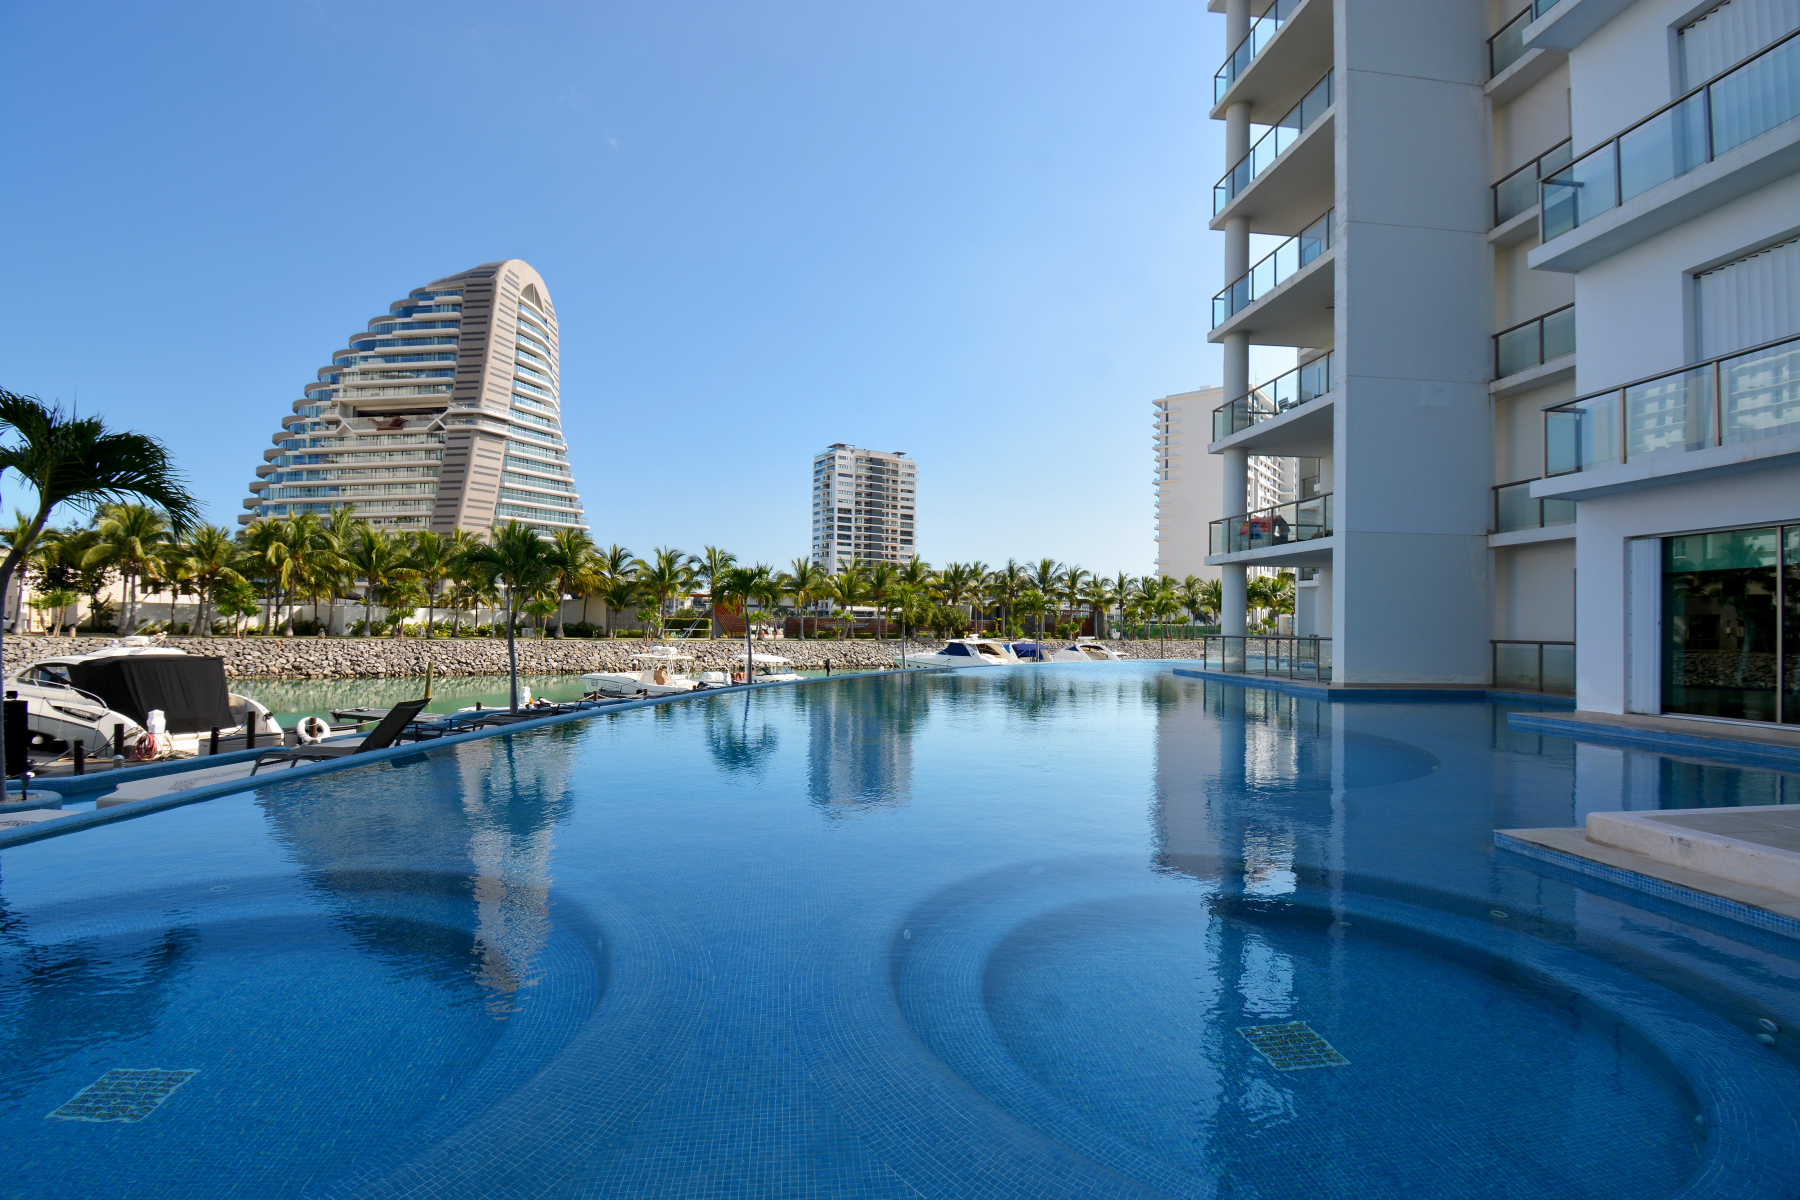 3 BEDROOM APARTMENT IN AN EXCLUSIVE AREA OF PUERTO CANCUN